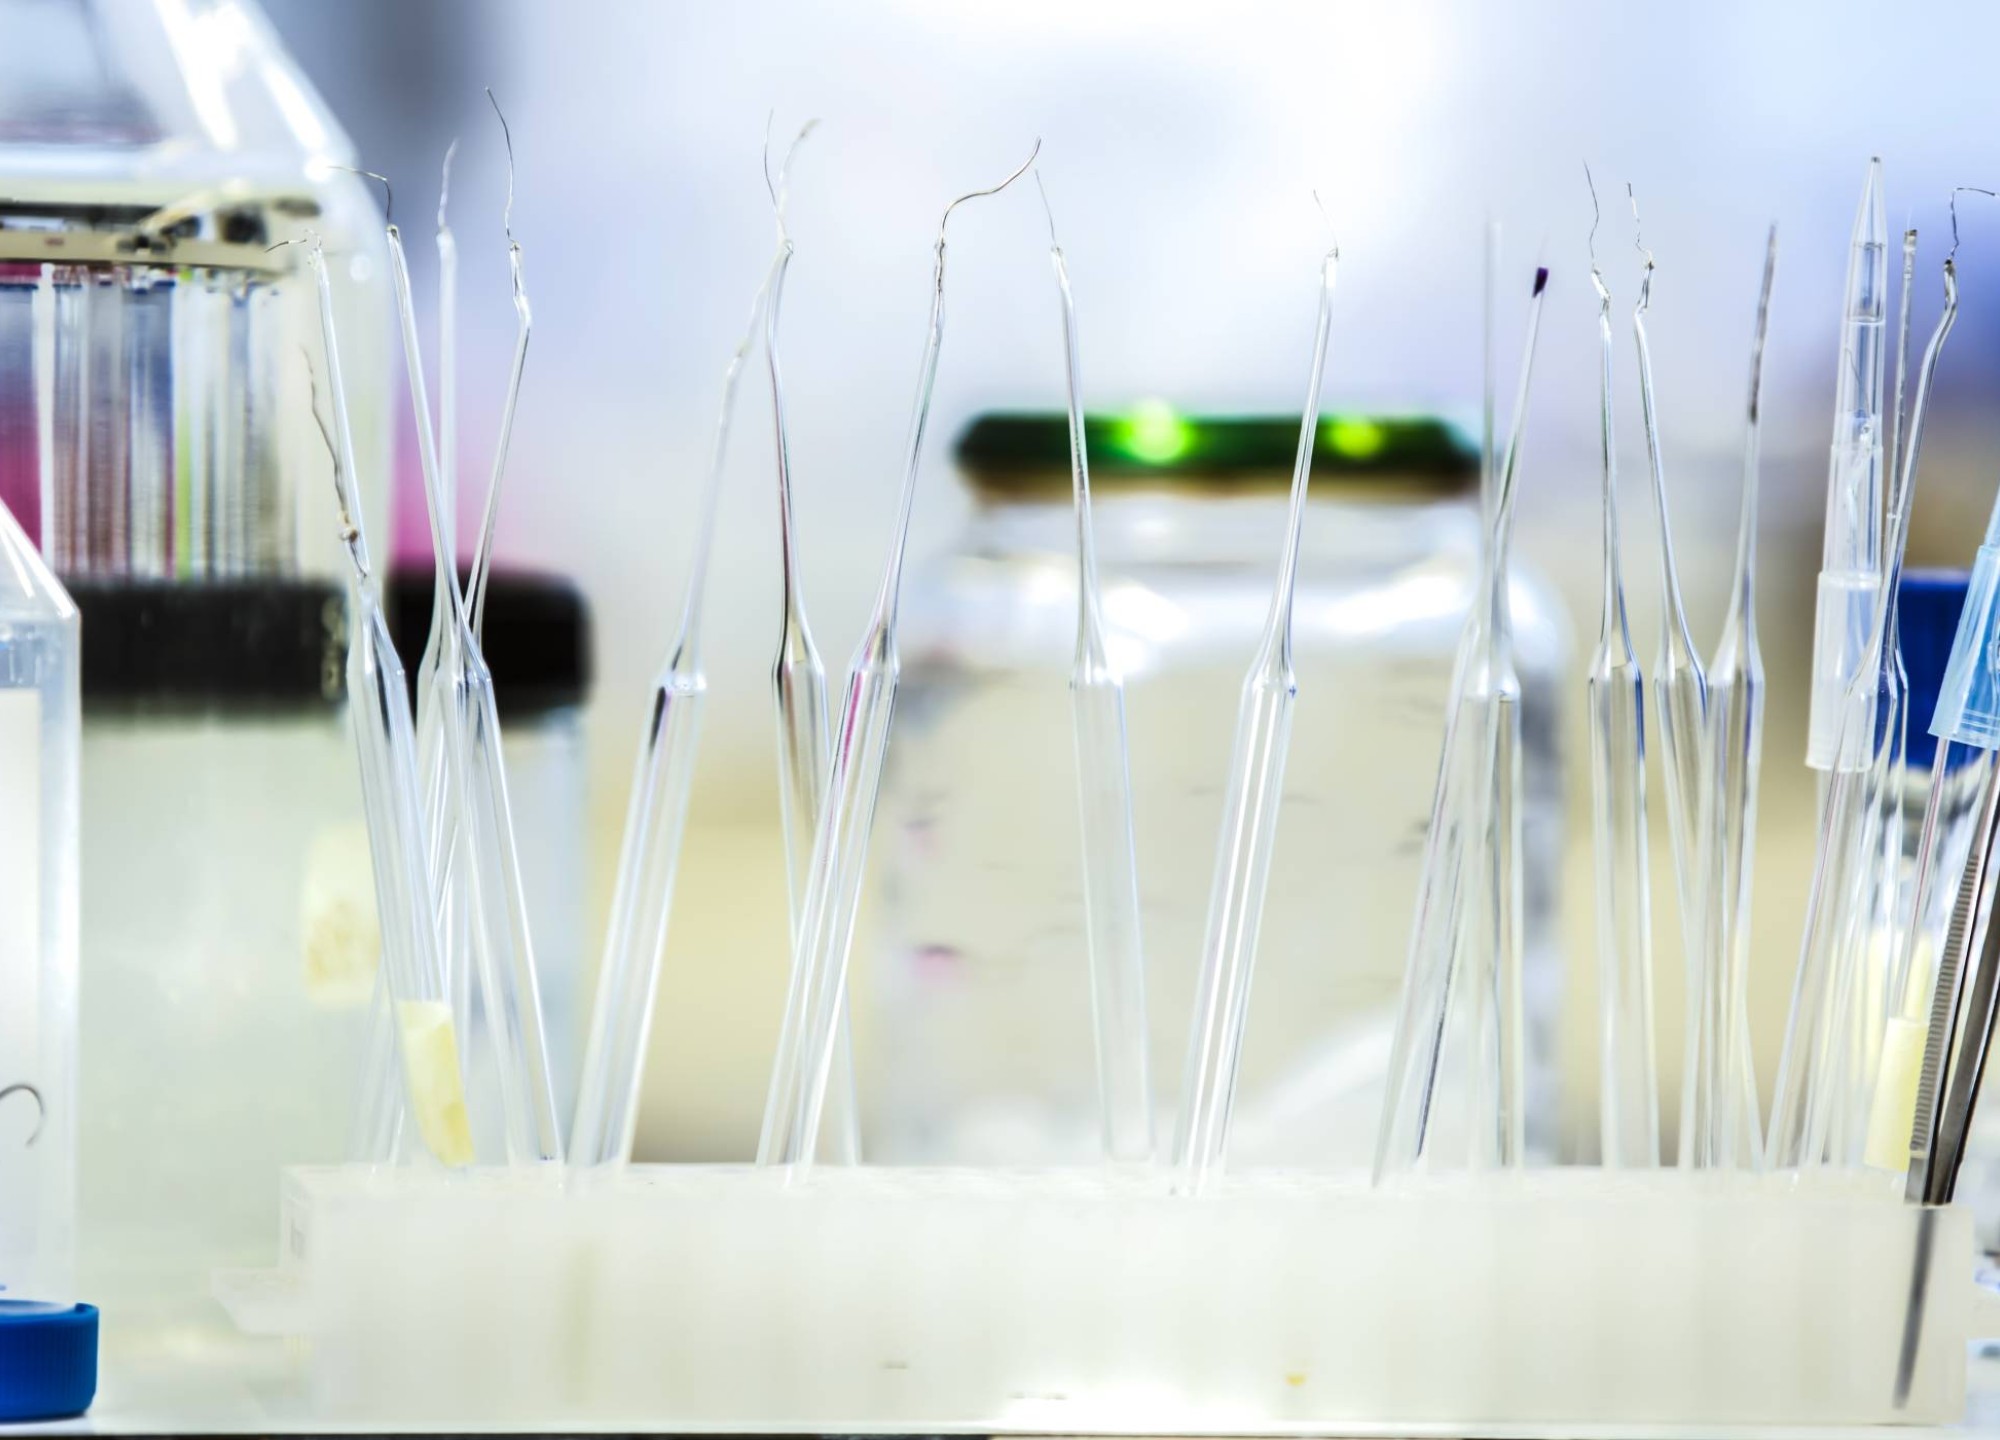 Pipettes in a rack are typical tools used in the natural sciences laboratory